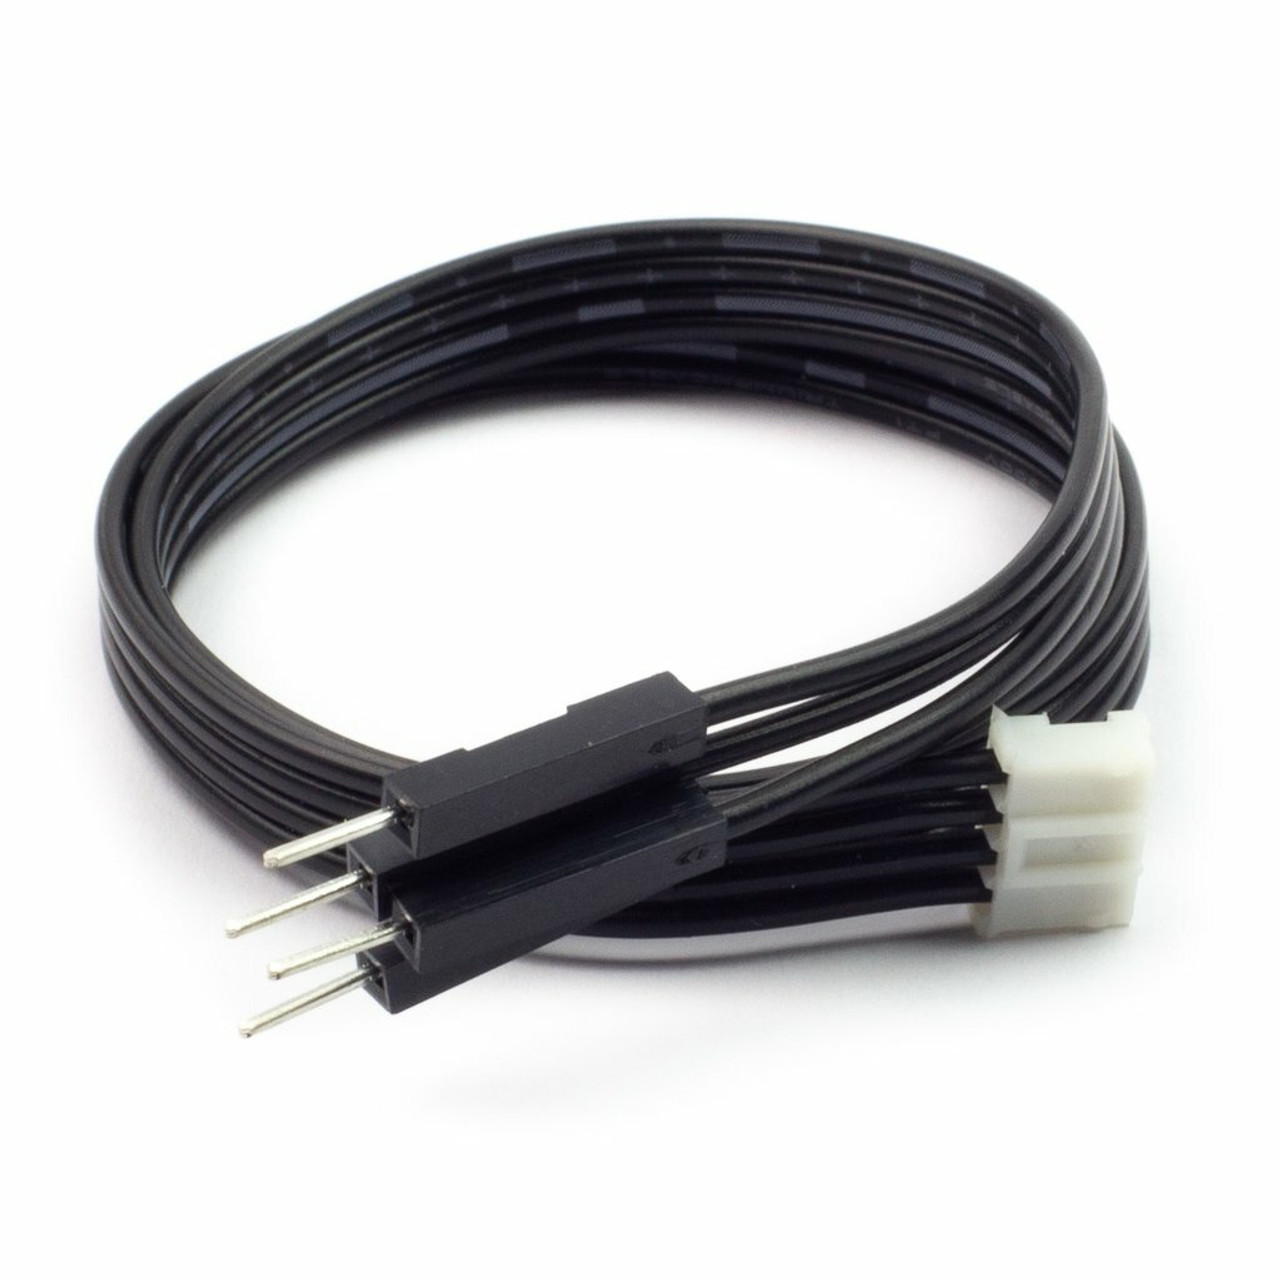 HyperPixel 4.0 I2C Cable (JST-PH to male DuPont)